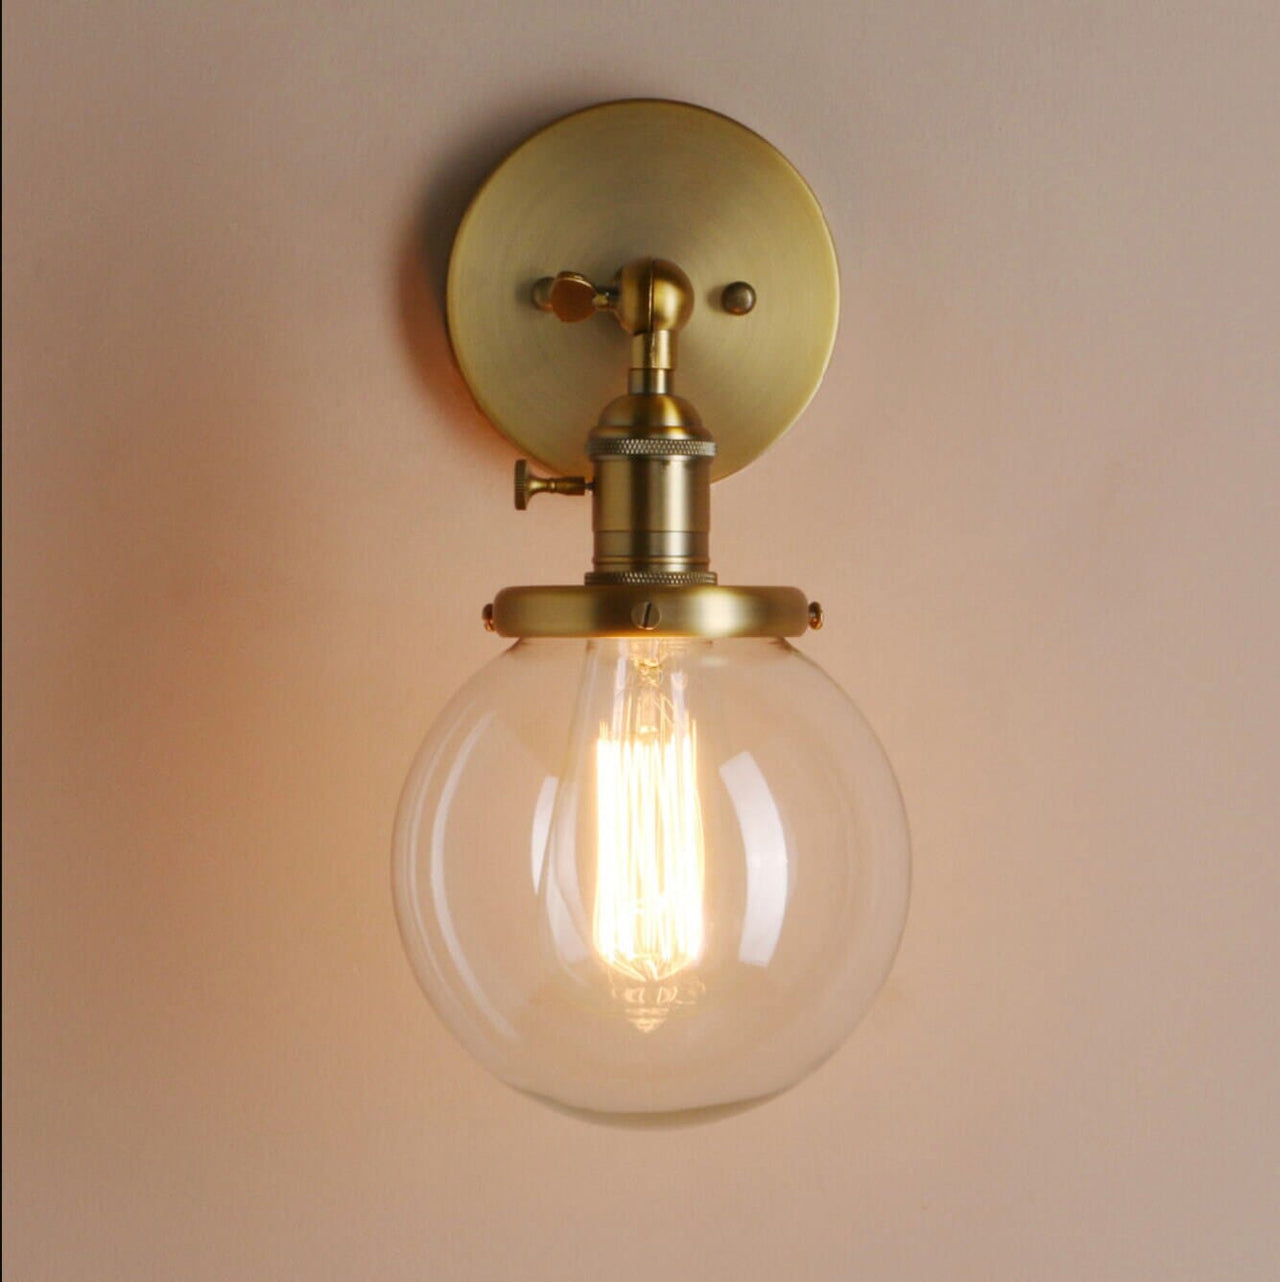 Antique Gold Wall Mount Fixture "WALL-EYE" Stylish Wall Lamp hardware & plug-in Sconces Artedimo 